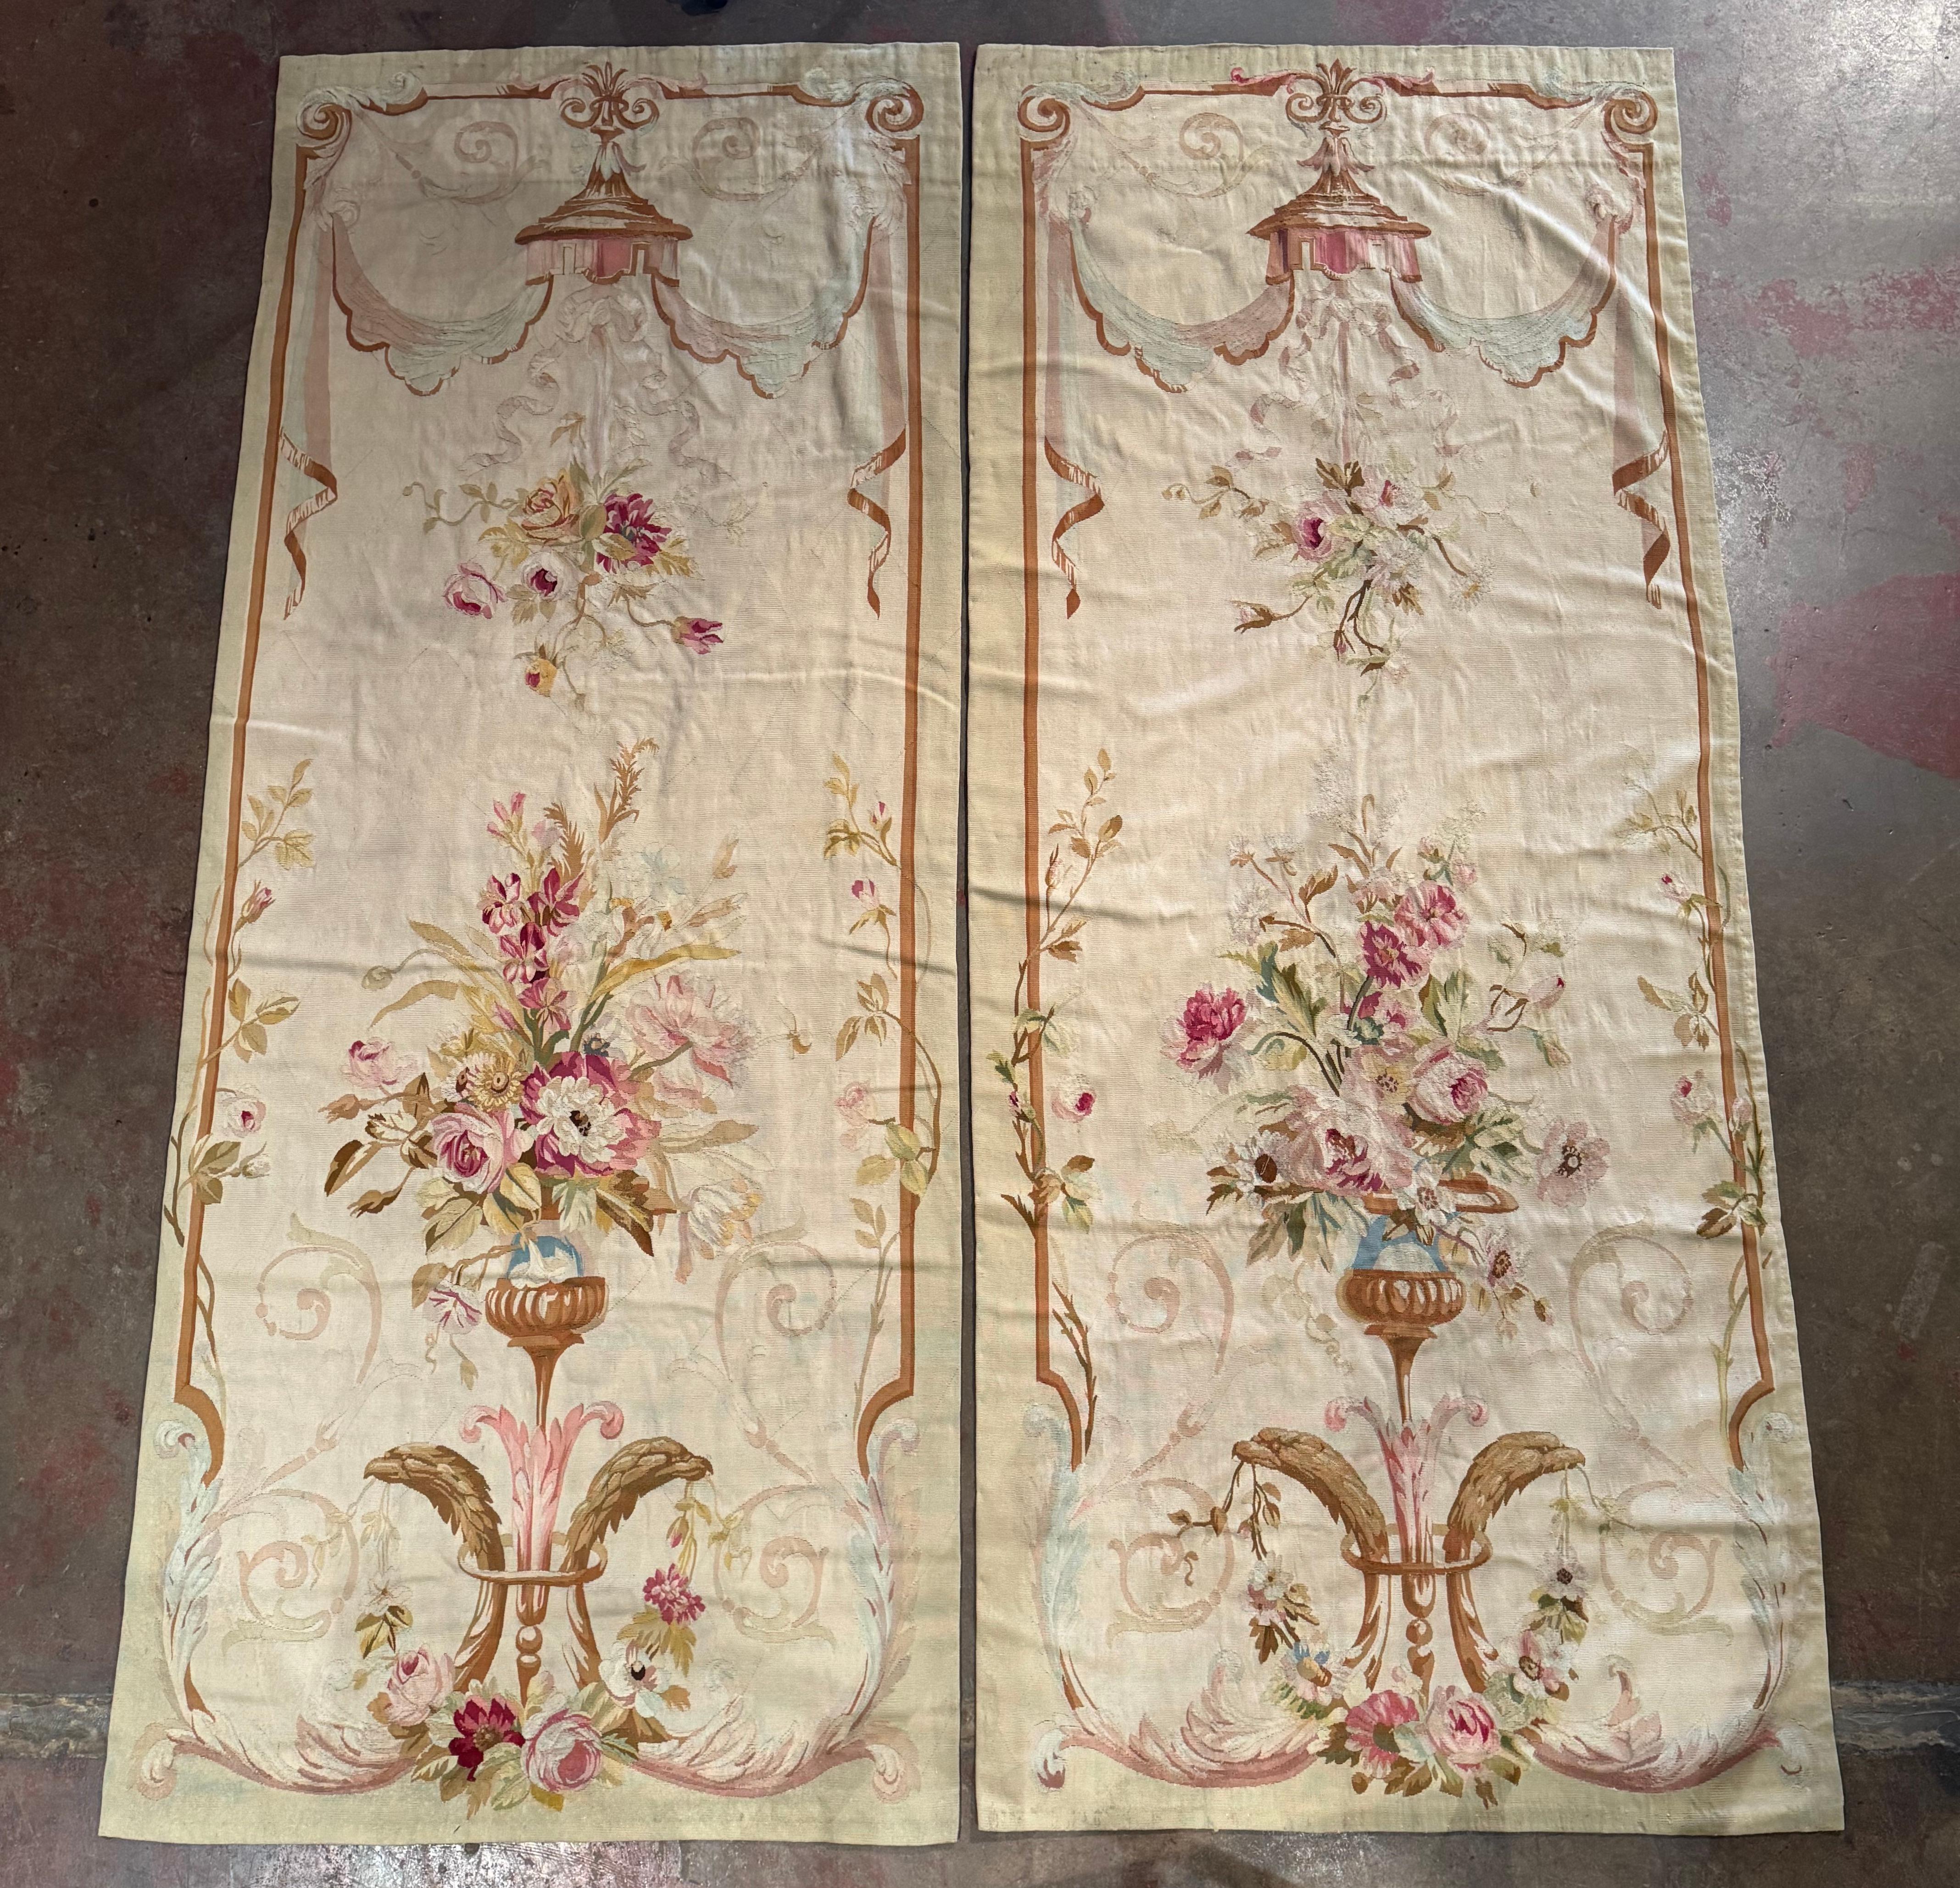 Tapestry Pair of Mid-19th Century French Handwoven Floral Aubusson Wall Hanging Portieres For Sale